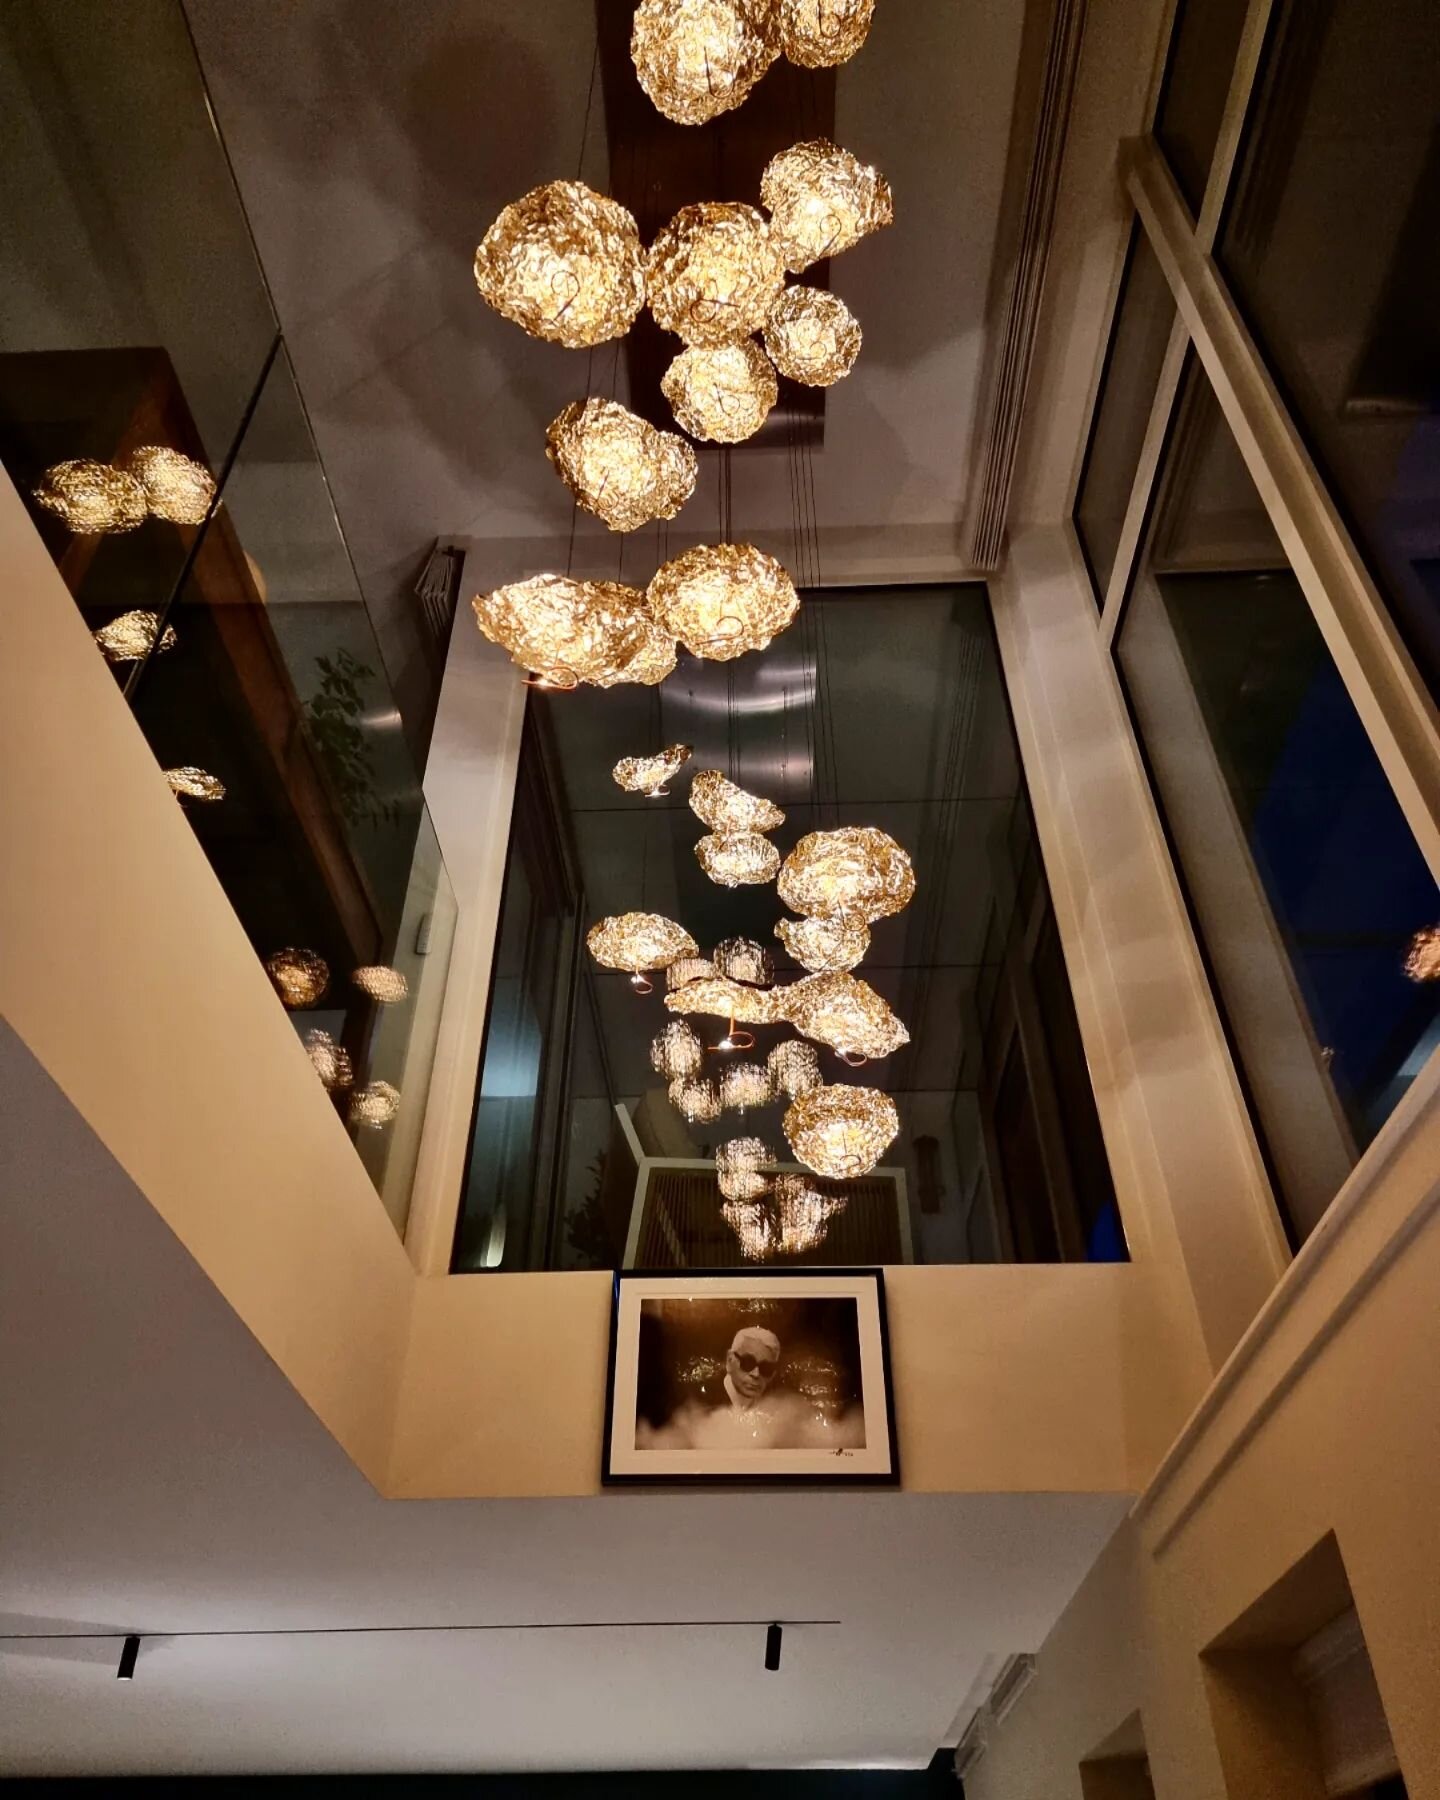 Lighting is everything and creates the entire atmosphere of a space. It changes your perception of your environment which is why it is essential to factor the light plan in from the conception of your project. Here in our Amsterdam Canal House Projec